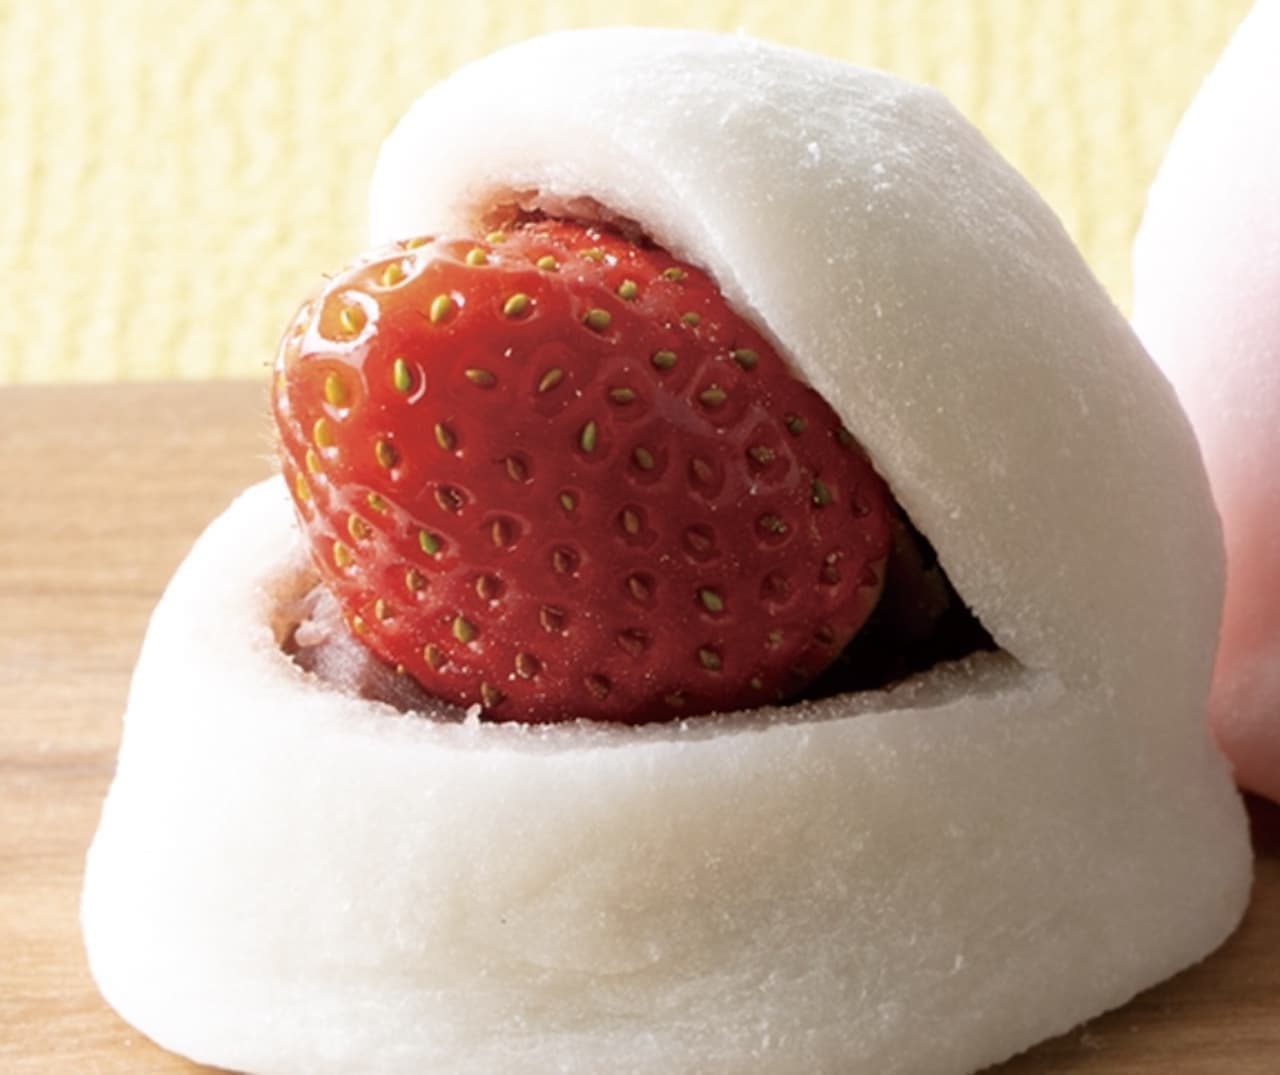 Chateraise "Big Strawberry Daifuku with Specially Selected Benihoppe Seeds and Sweet Red Bean Paste